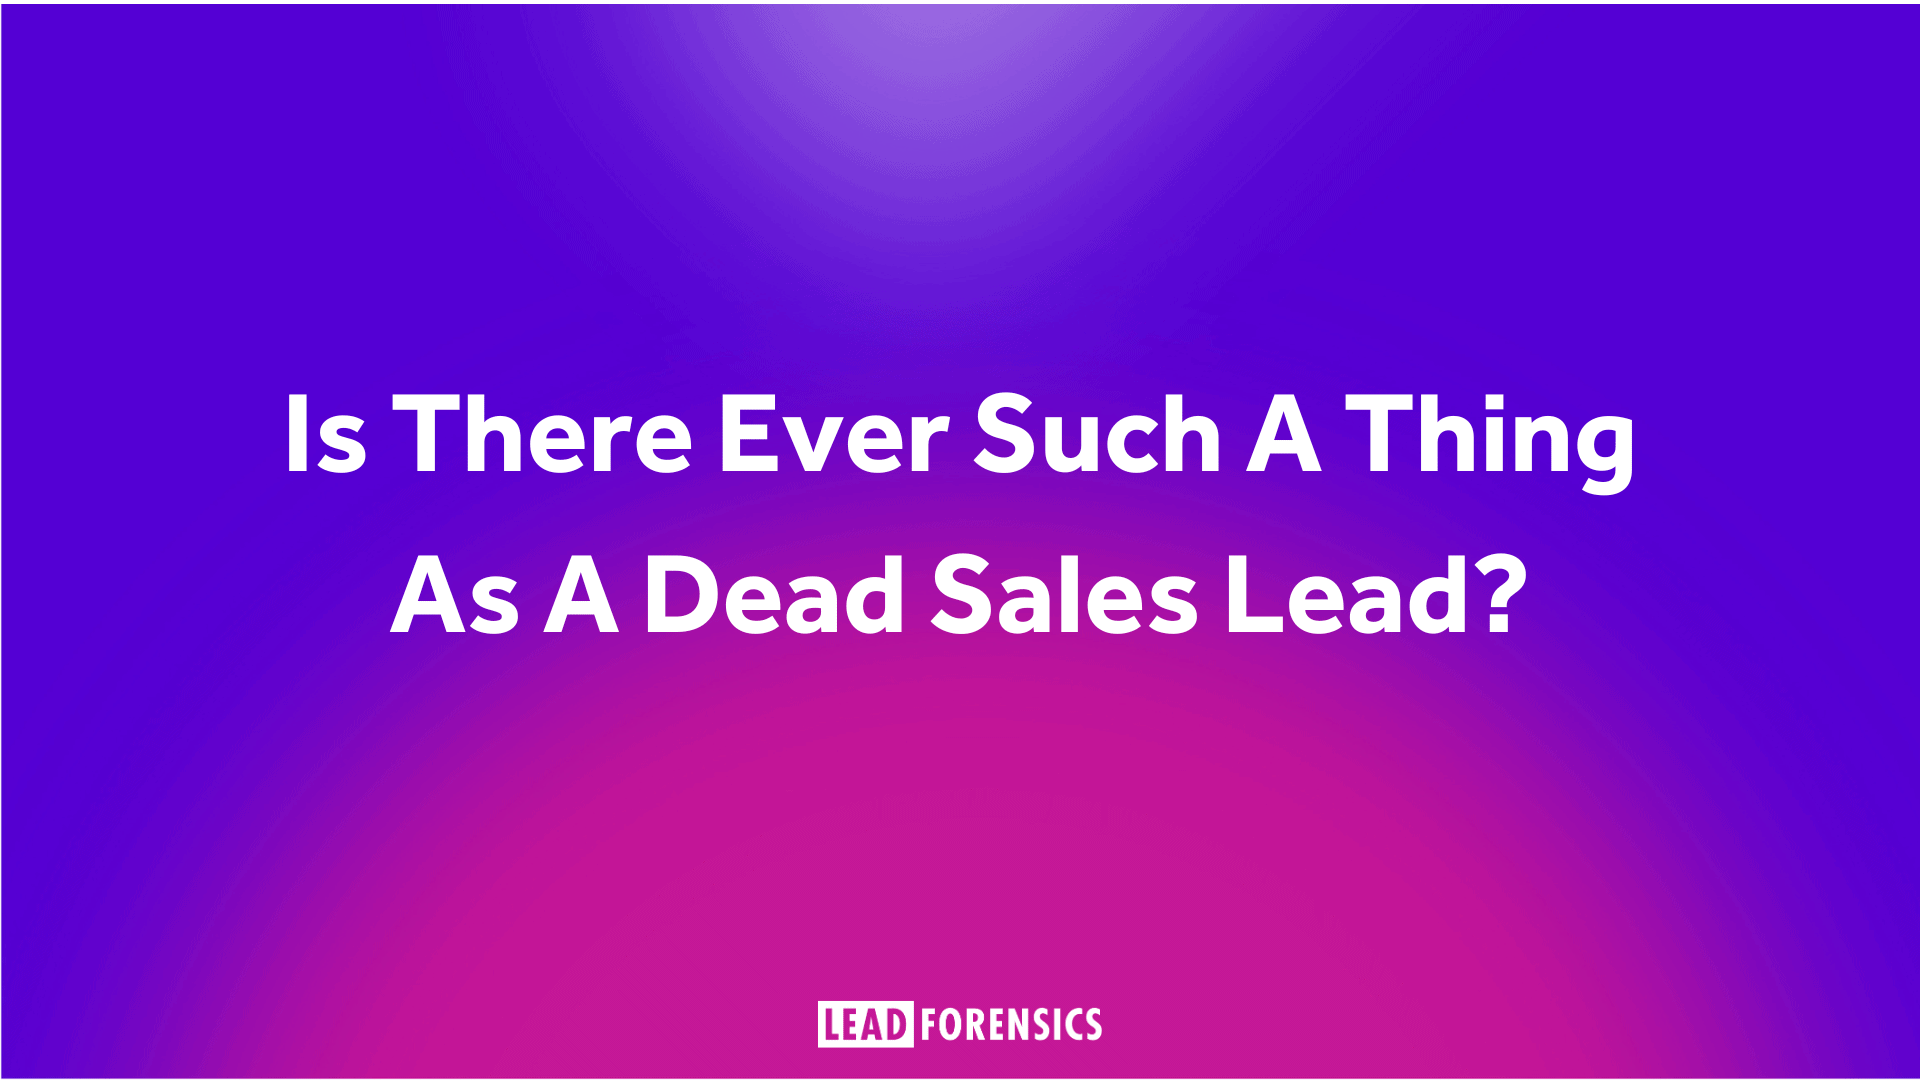 Is There Ever Such A Thing As A Dead Sales Lead